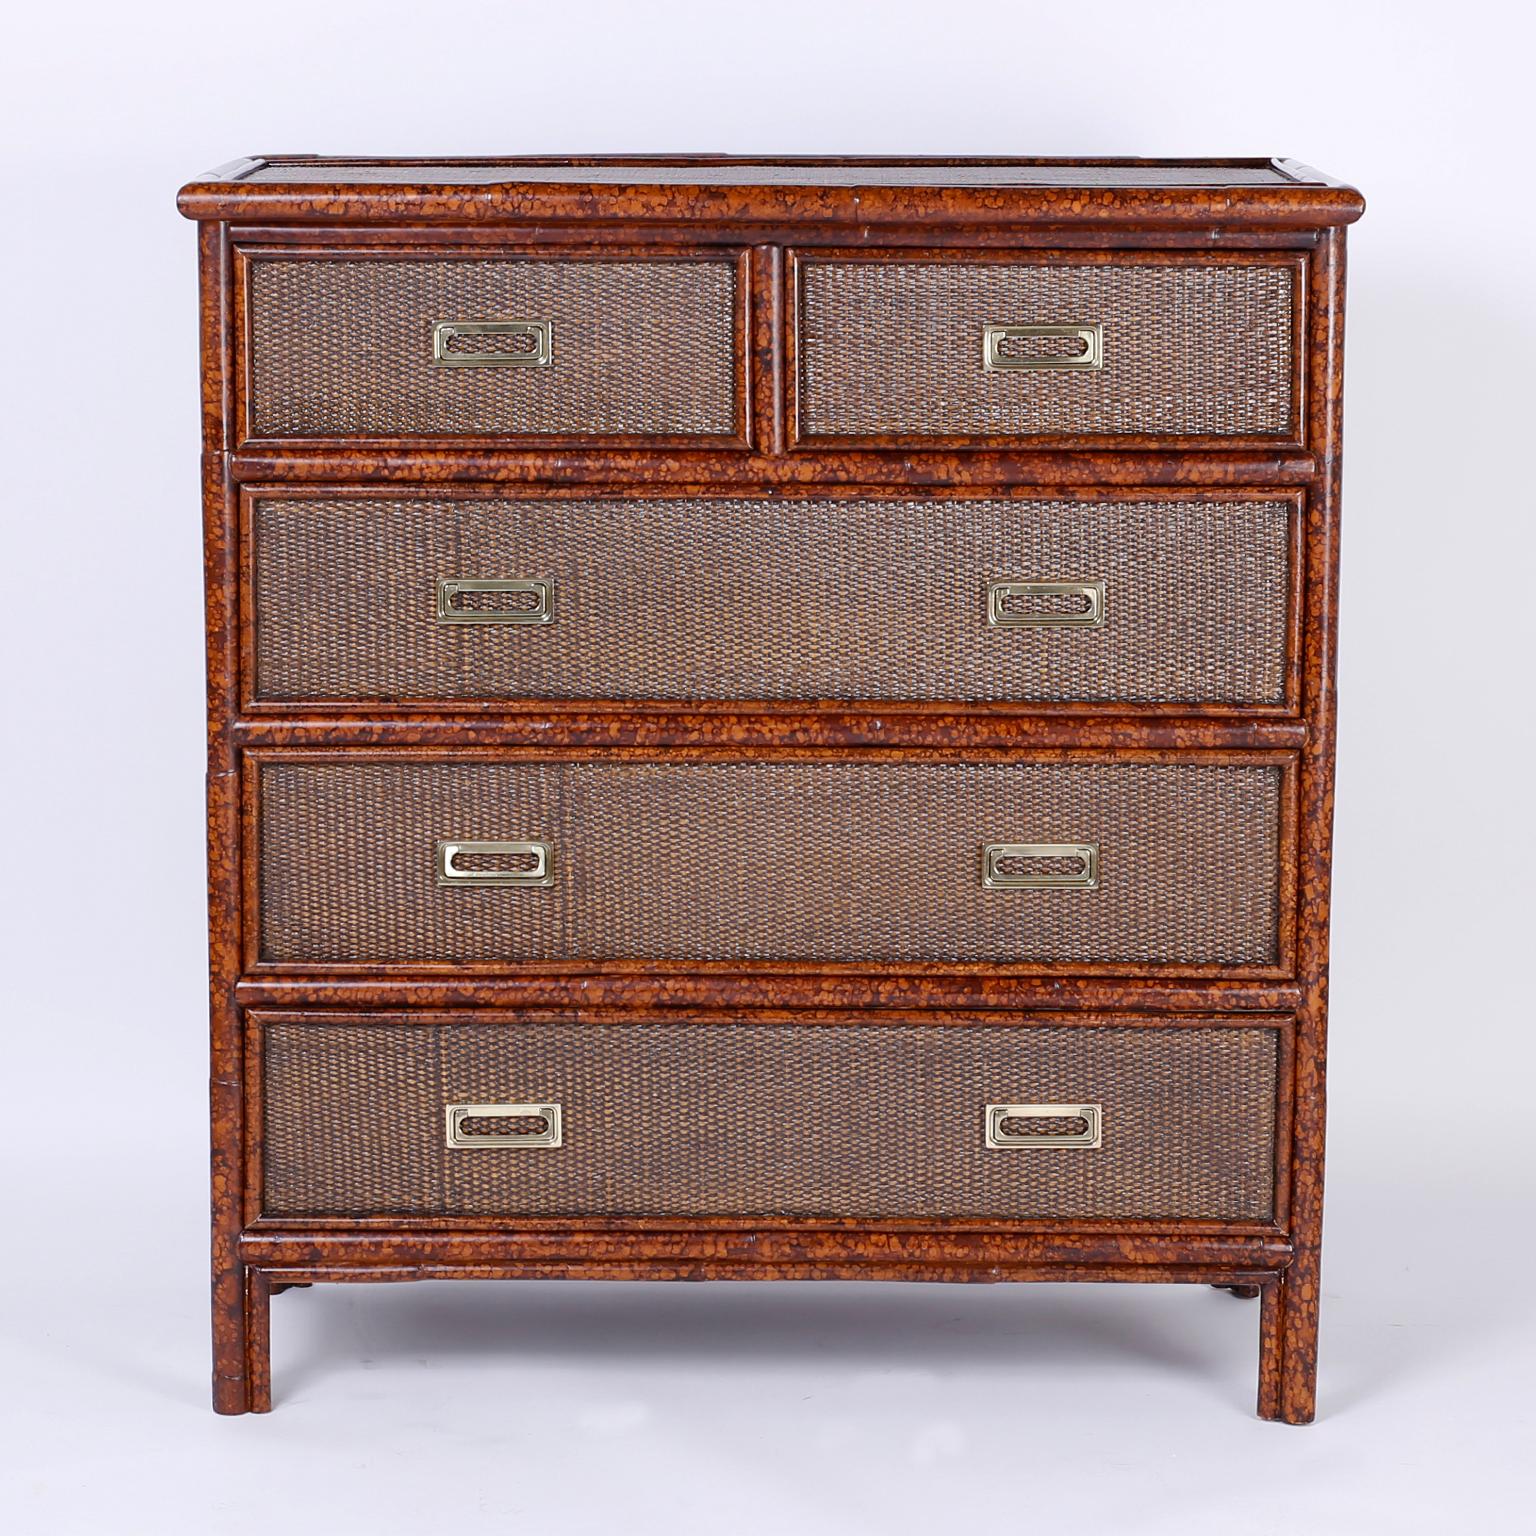 American British Colonial Style Grass Cloth Chest of Drawers